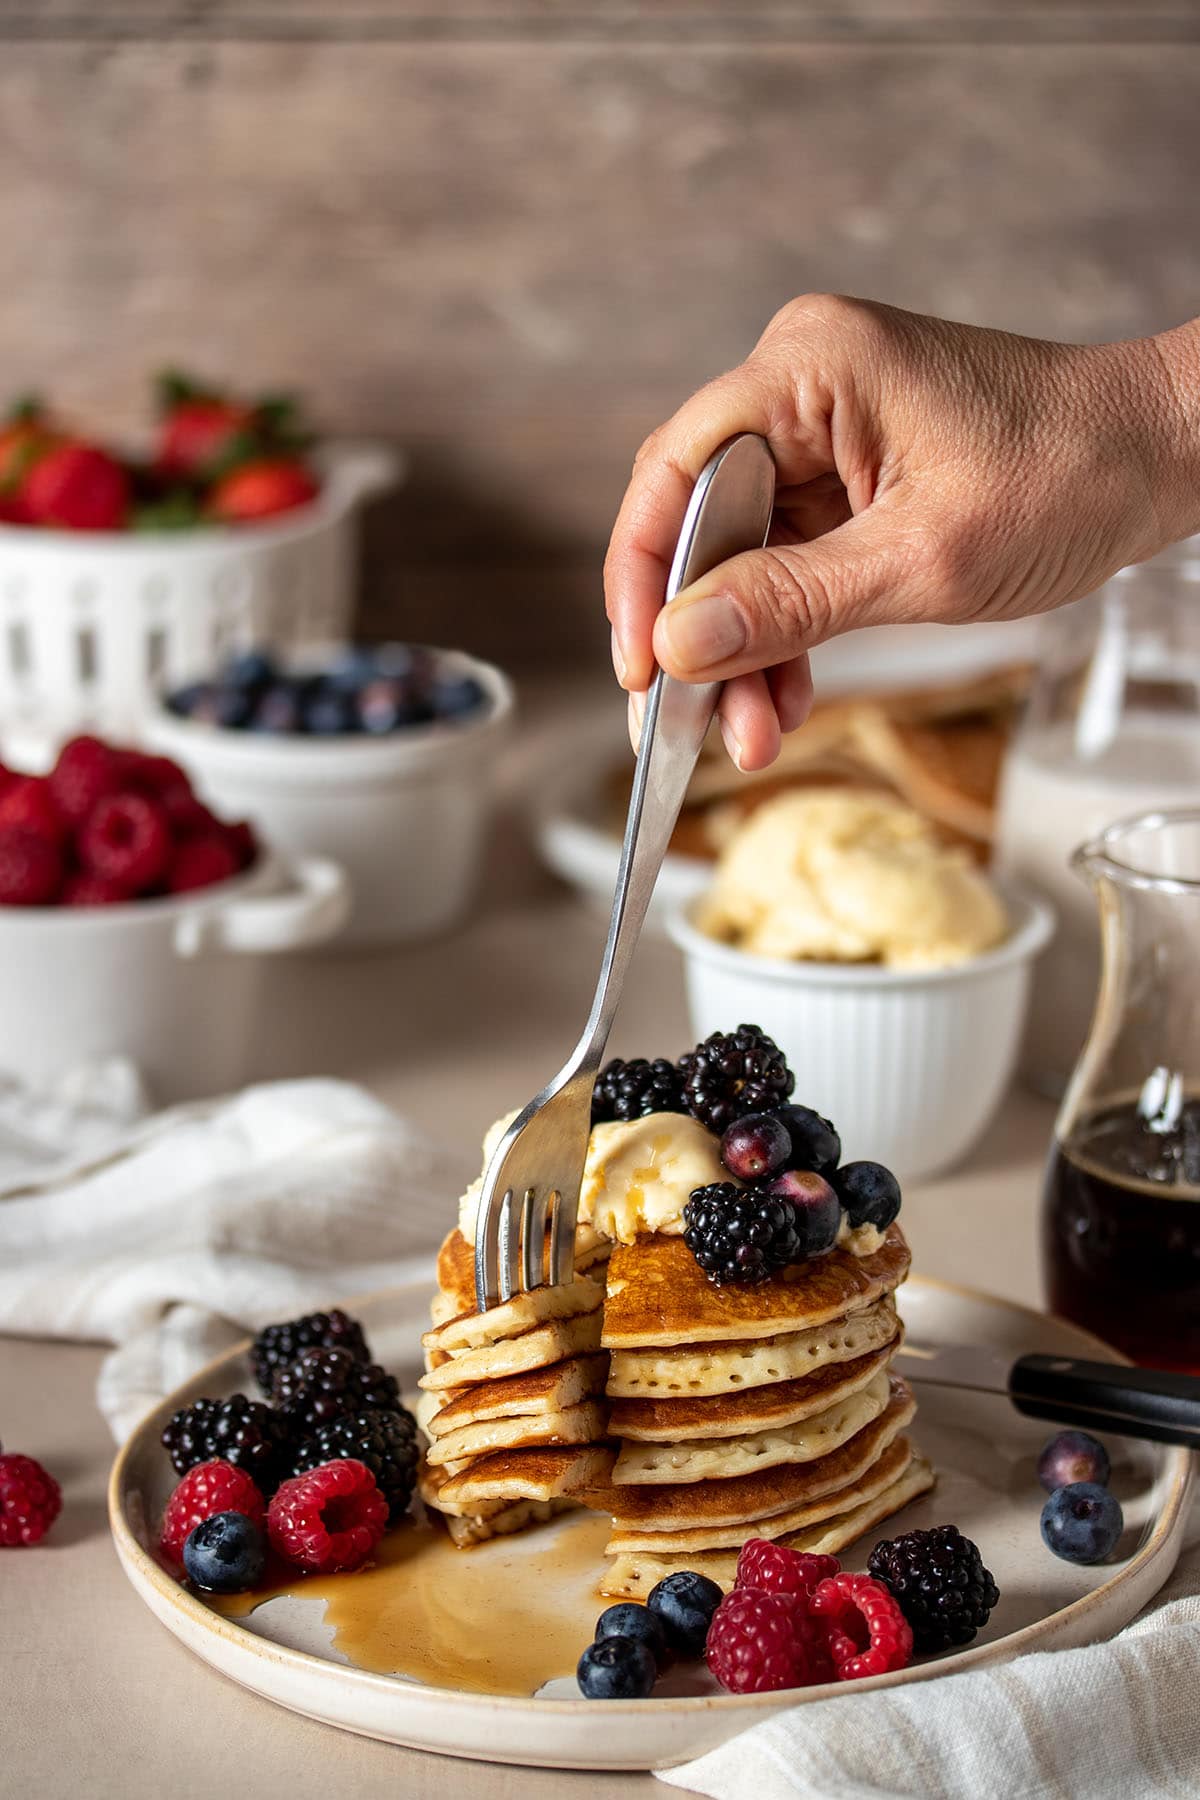 A hand holding a fork getting a bite out of a stack of pancakes topped with butter and berries.